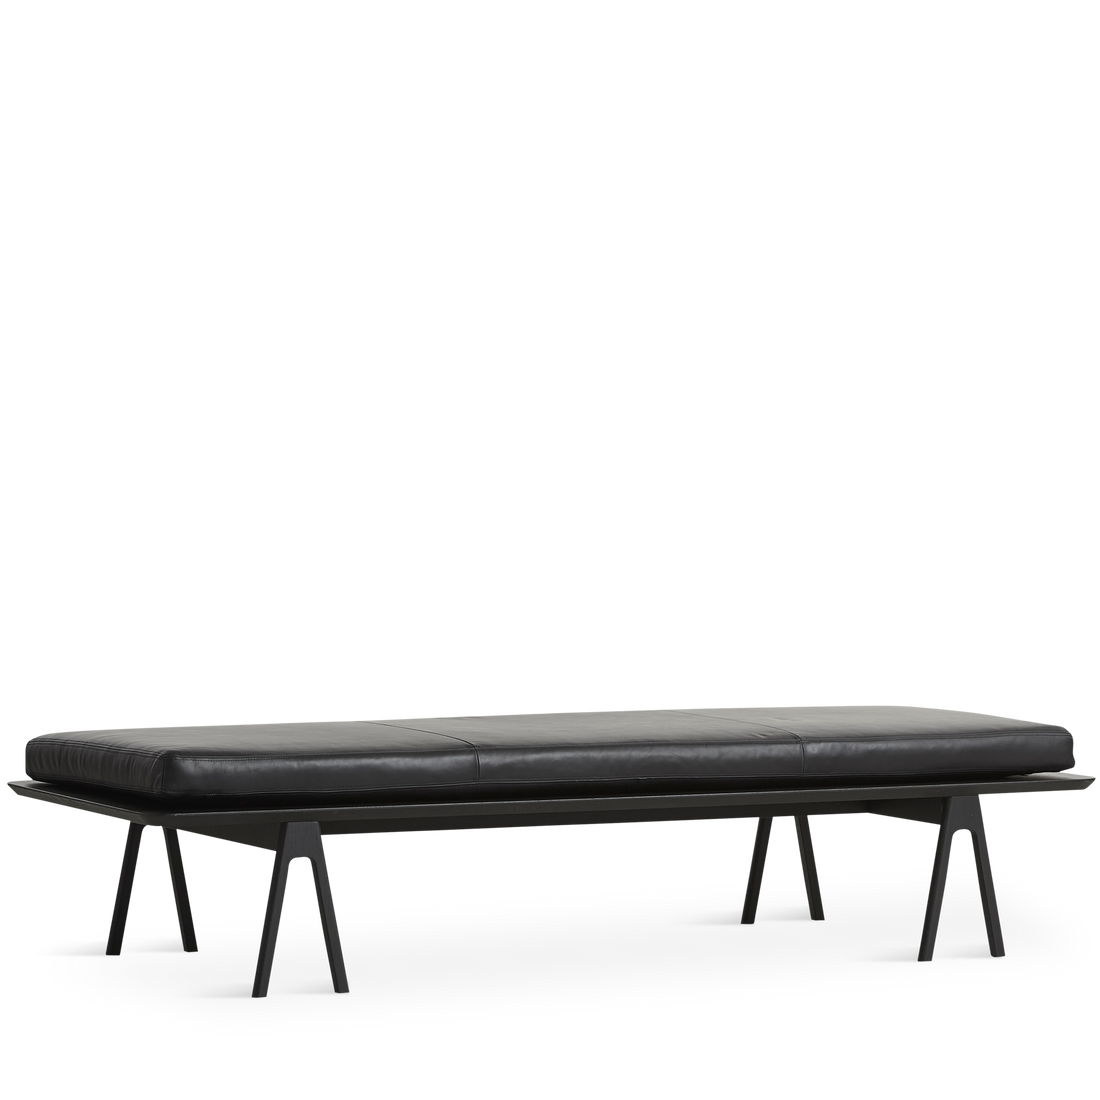 WOUD -  Level daybed - Black/black 190x76,50x41 cm